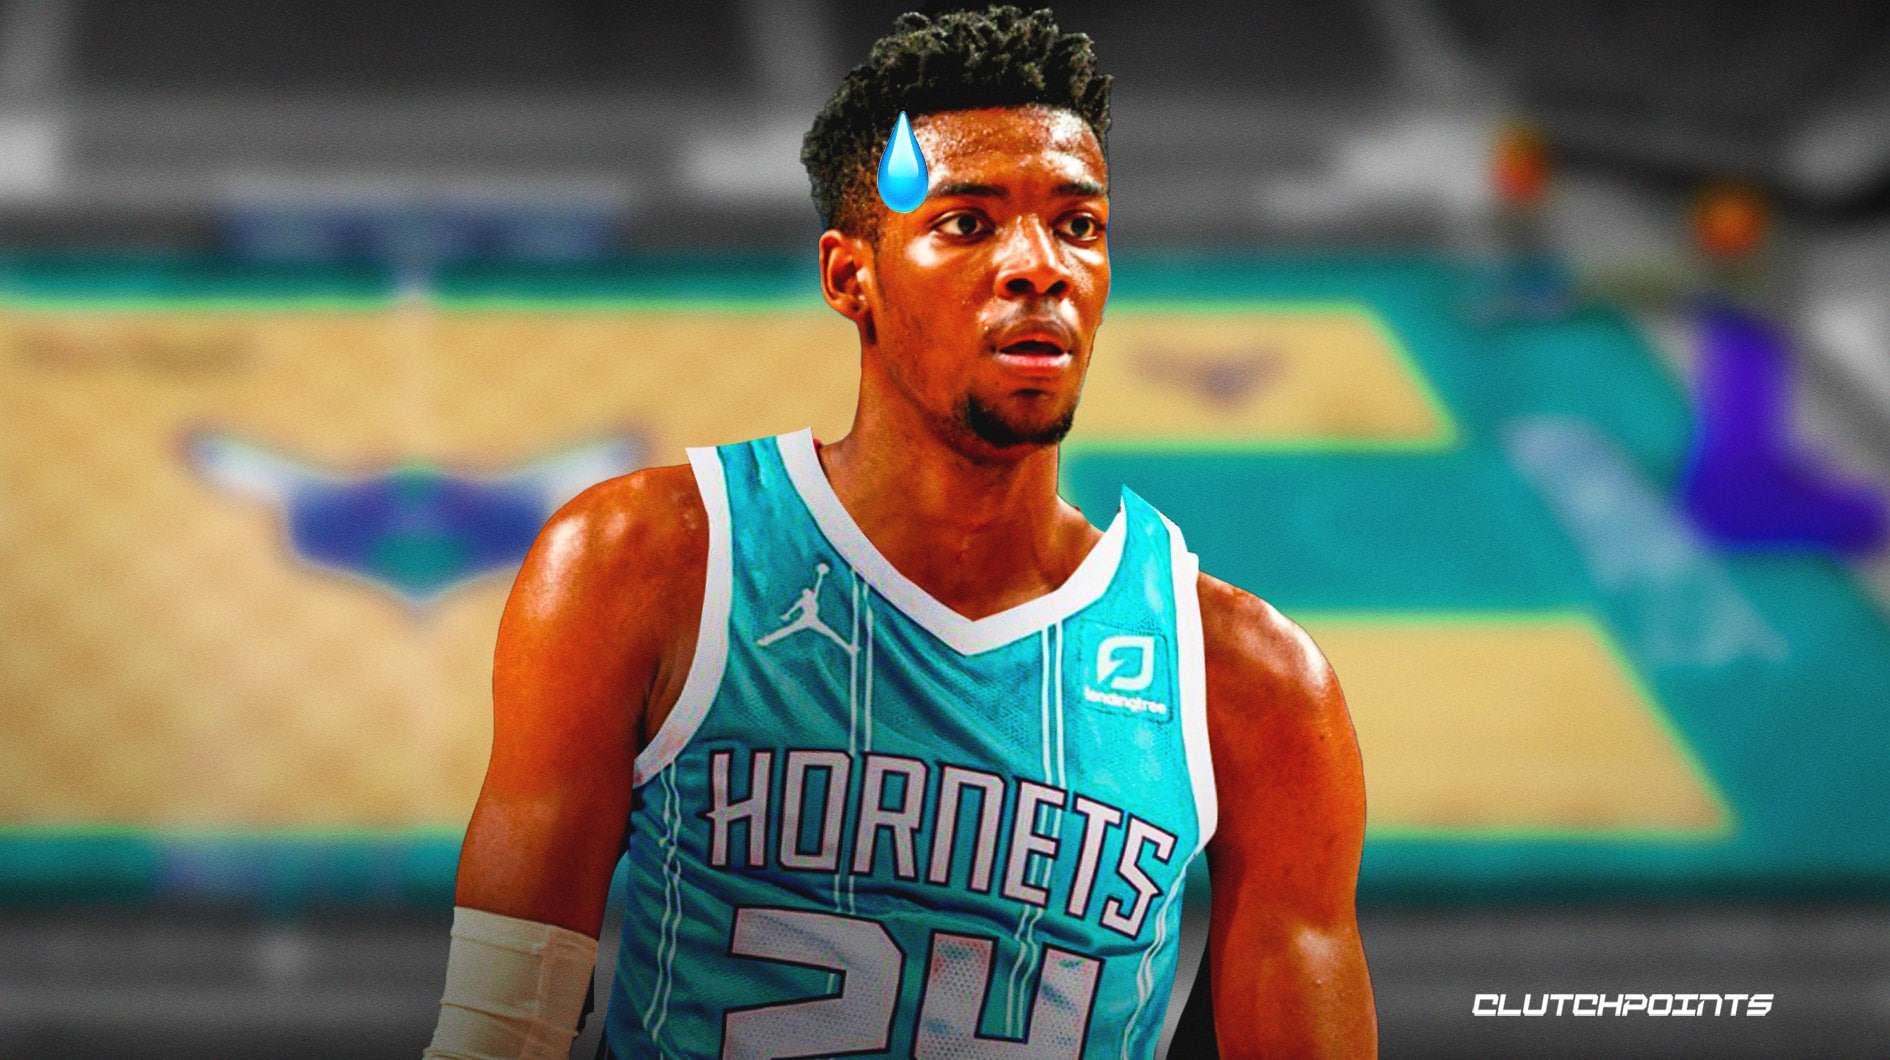 No. 2 overall pick Brandon Miller ruled out for Hornets after